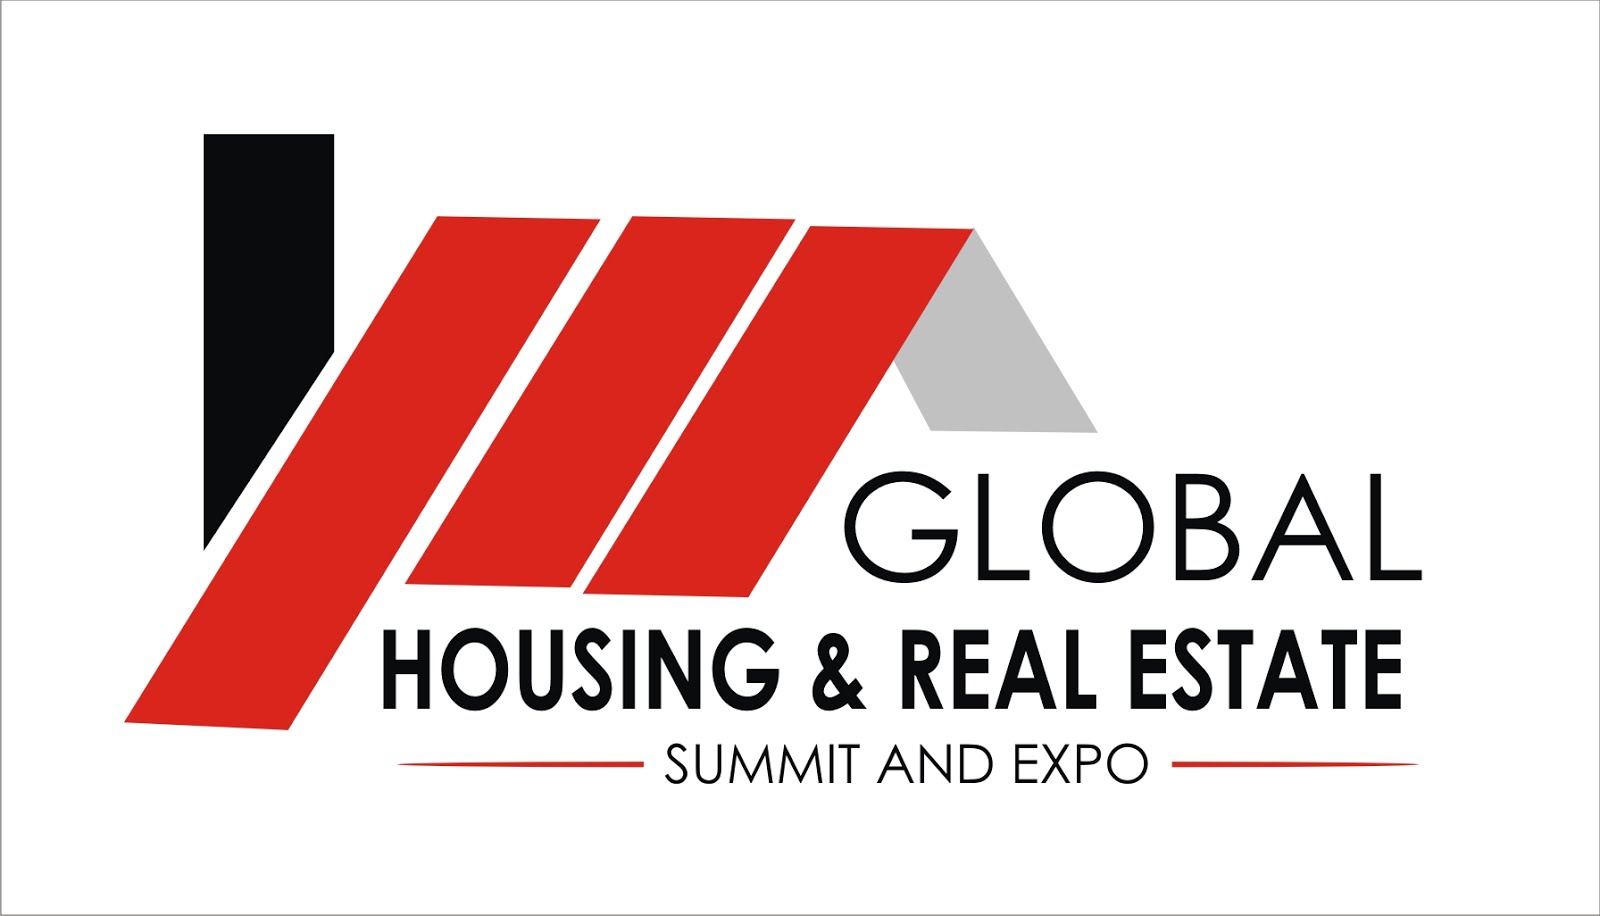 GLOBAL HOUSING AND REAL ESTATE SUMMIT AND EXPO